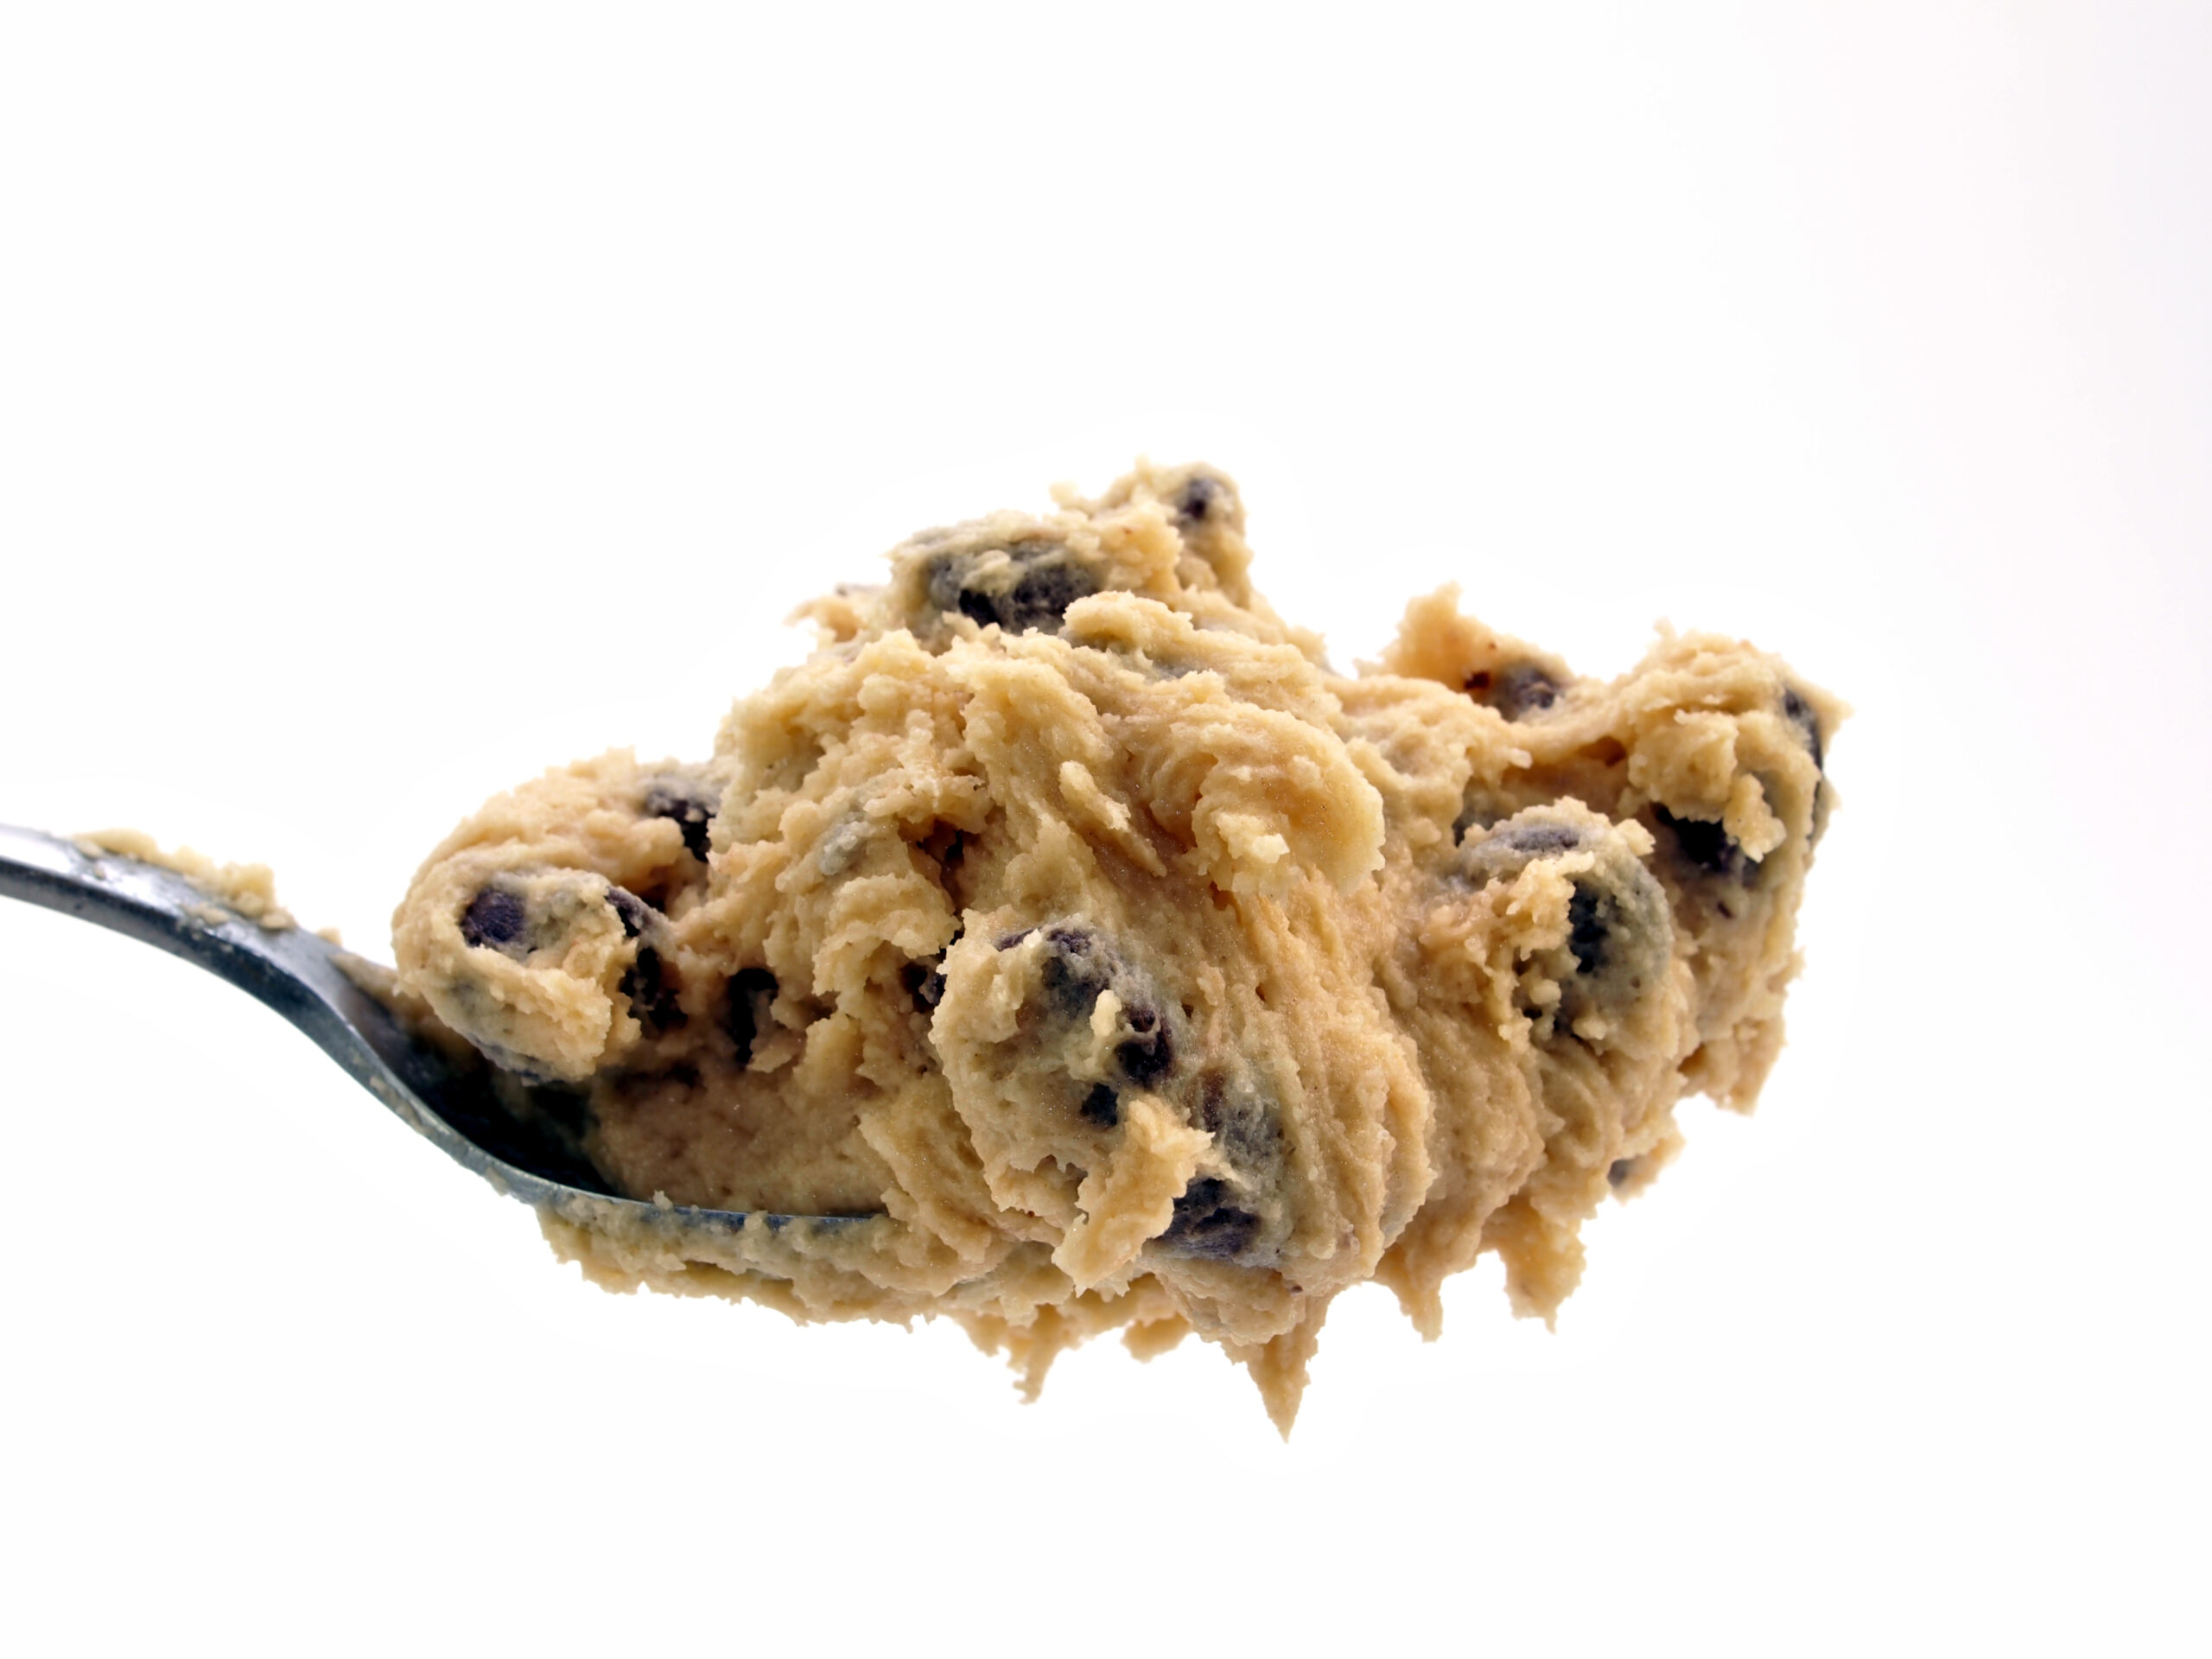 Salmonella Outbreak Linked to Flour, Raw Cookie Dough Reported in These States